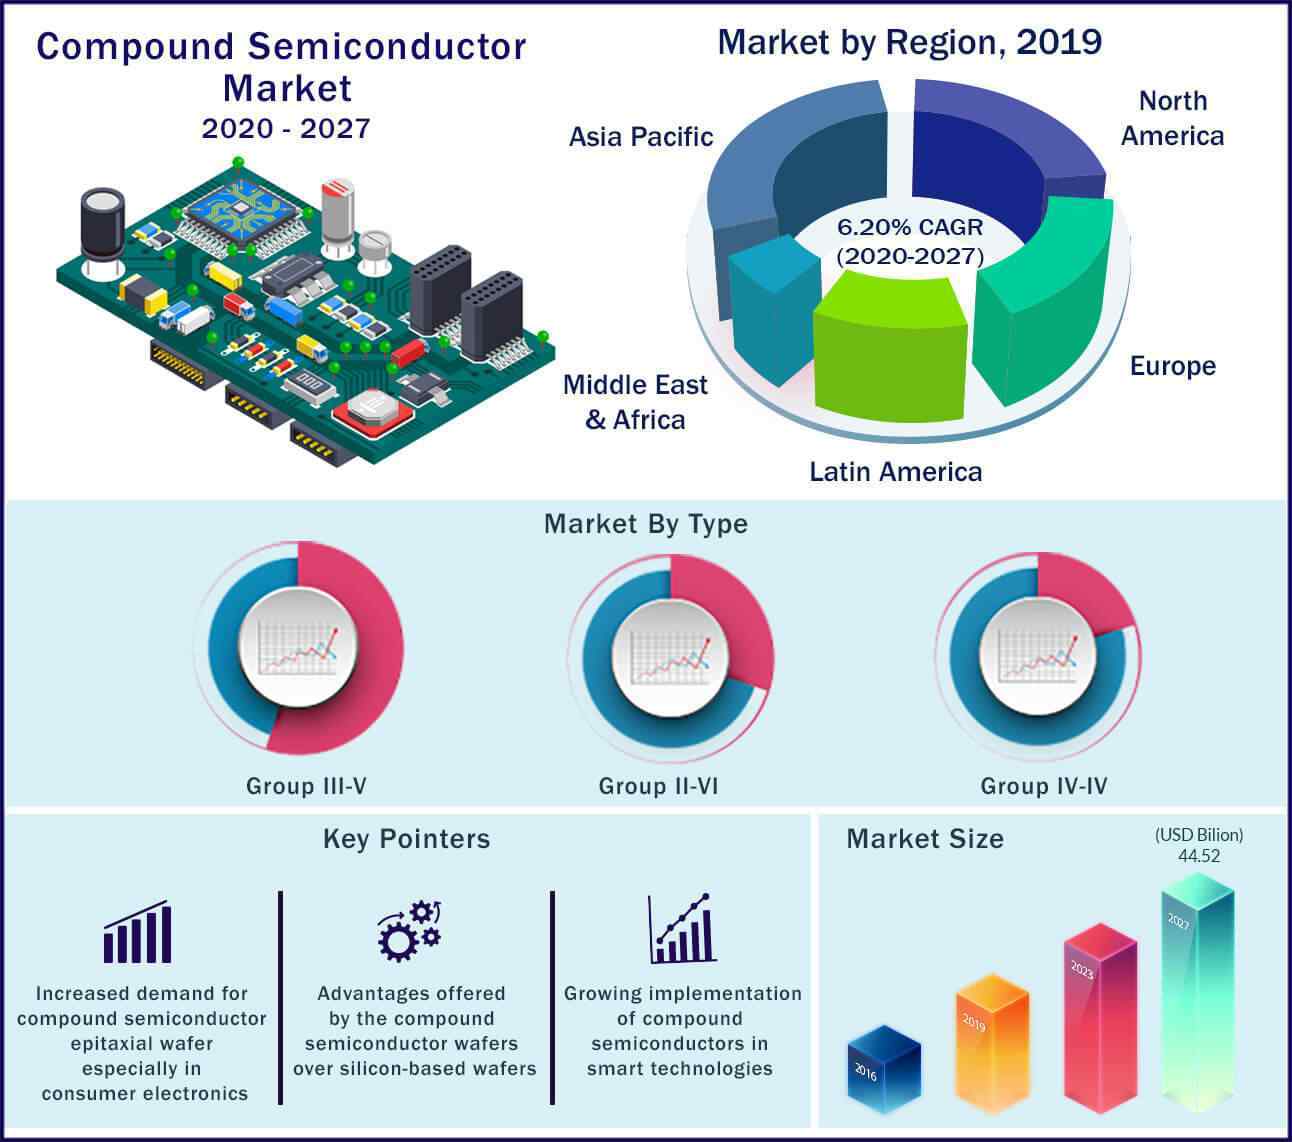 Global Compound Semiconductor Market 2020 to 2027